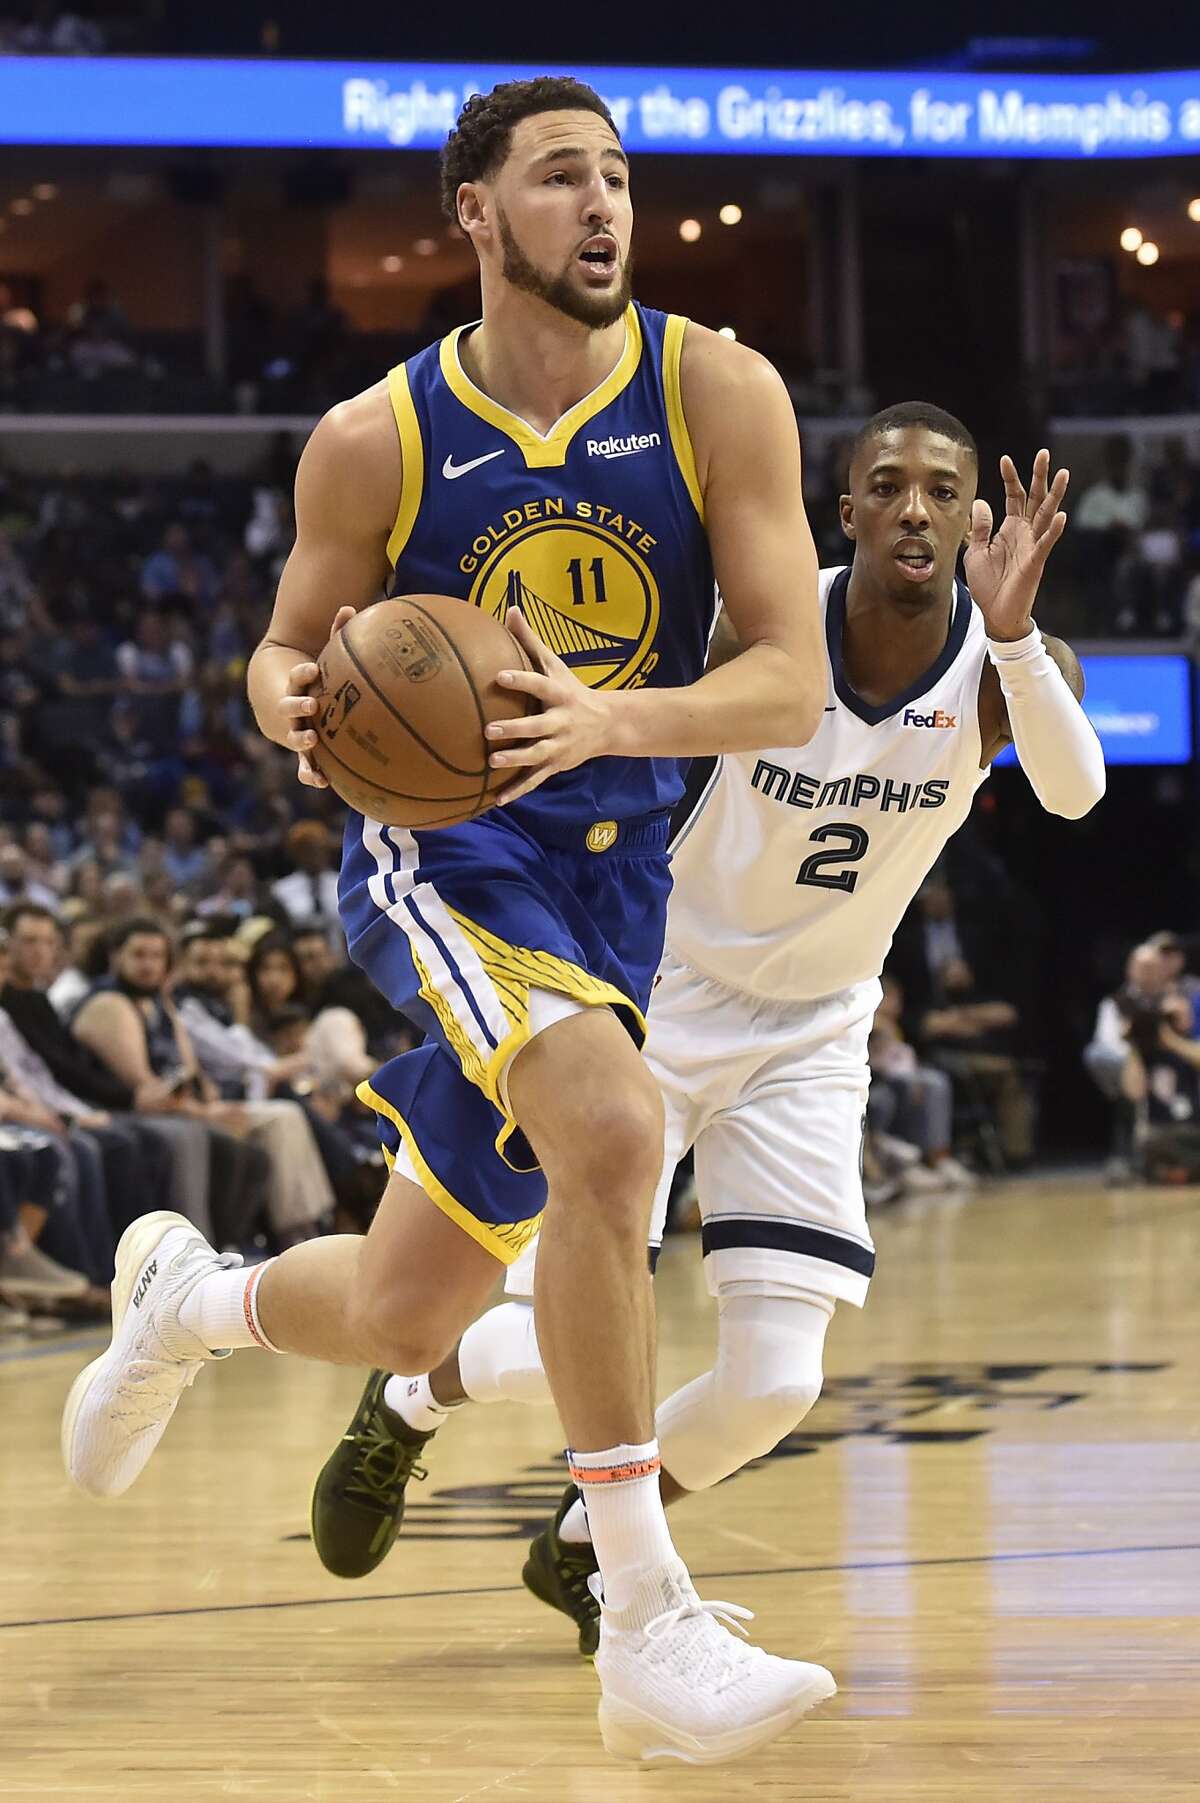 Golden State Warriors guard Klay Thompson (11) drives next to Memphis Grizzlies guard Delon Wright (2) during the second half of an NBA basketball game Wednesday, March 27, 2019, in Memphis, Tenn. (AP Photo/Brandon Dill)